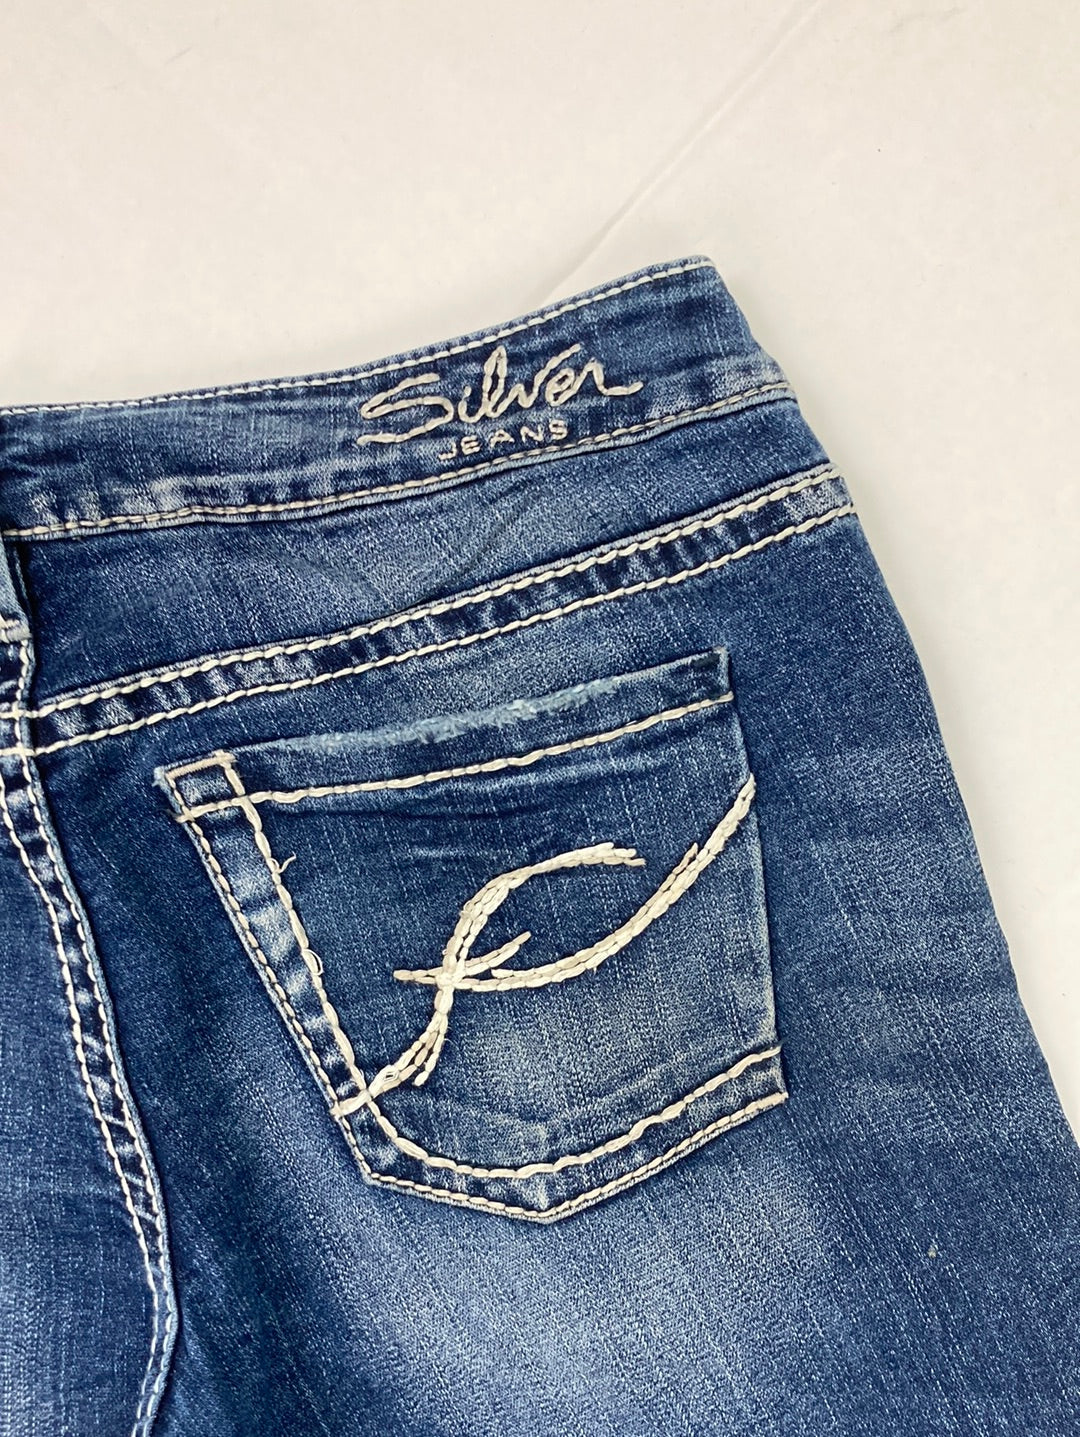 Silver Jeans 31/31 (M)